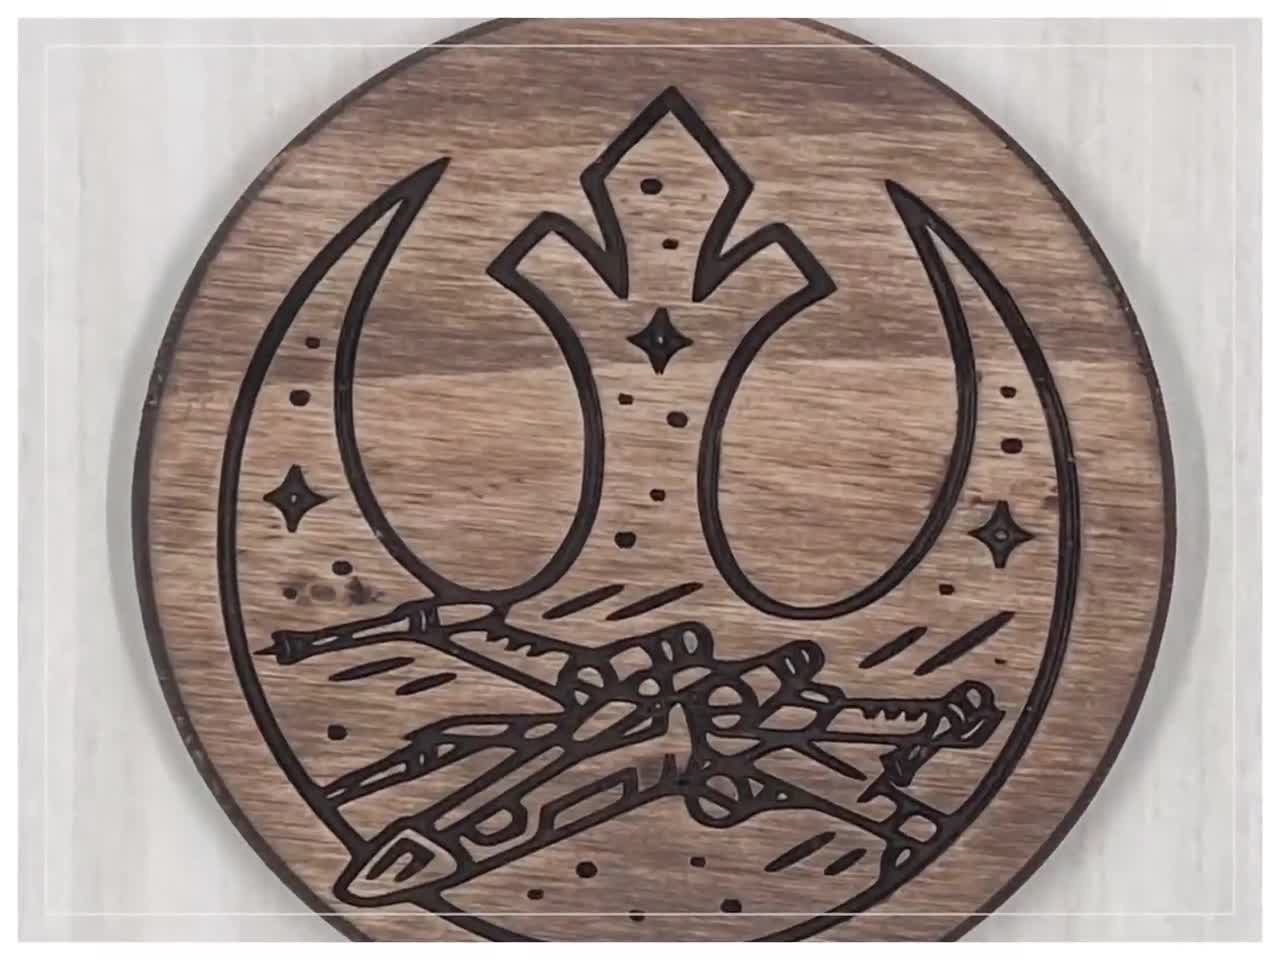 Star Wars inspired collection. Coaster set of 4 & wooden spoon. #sta